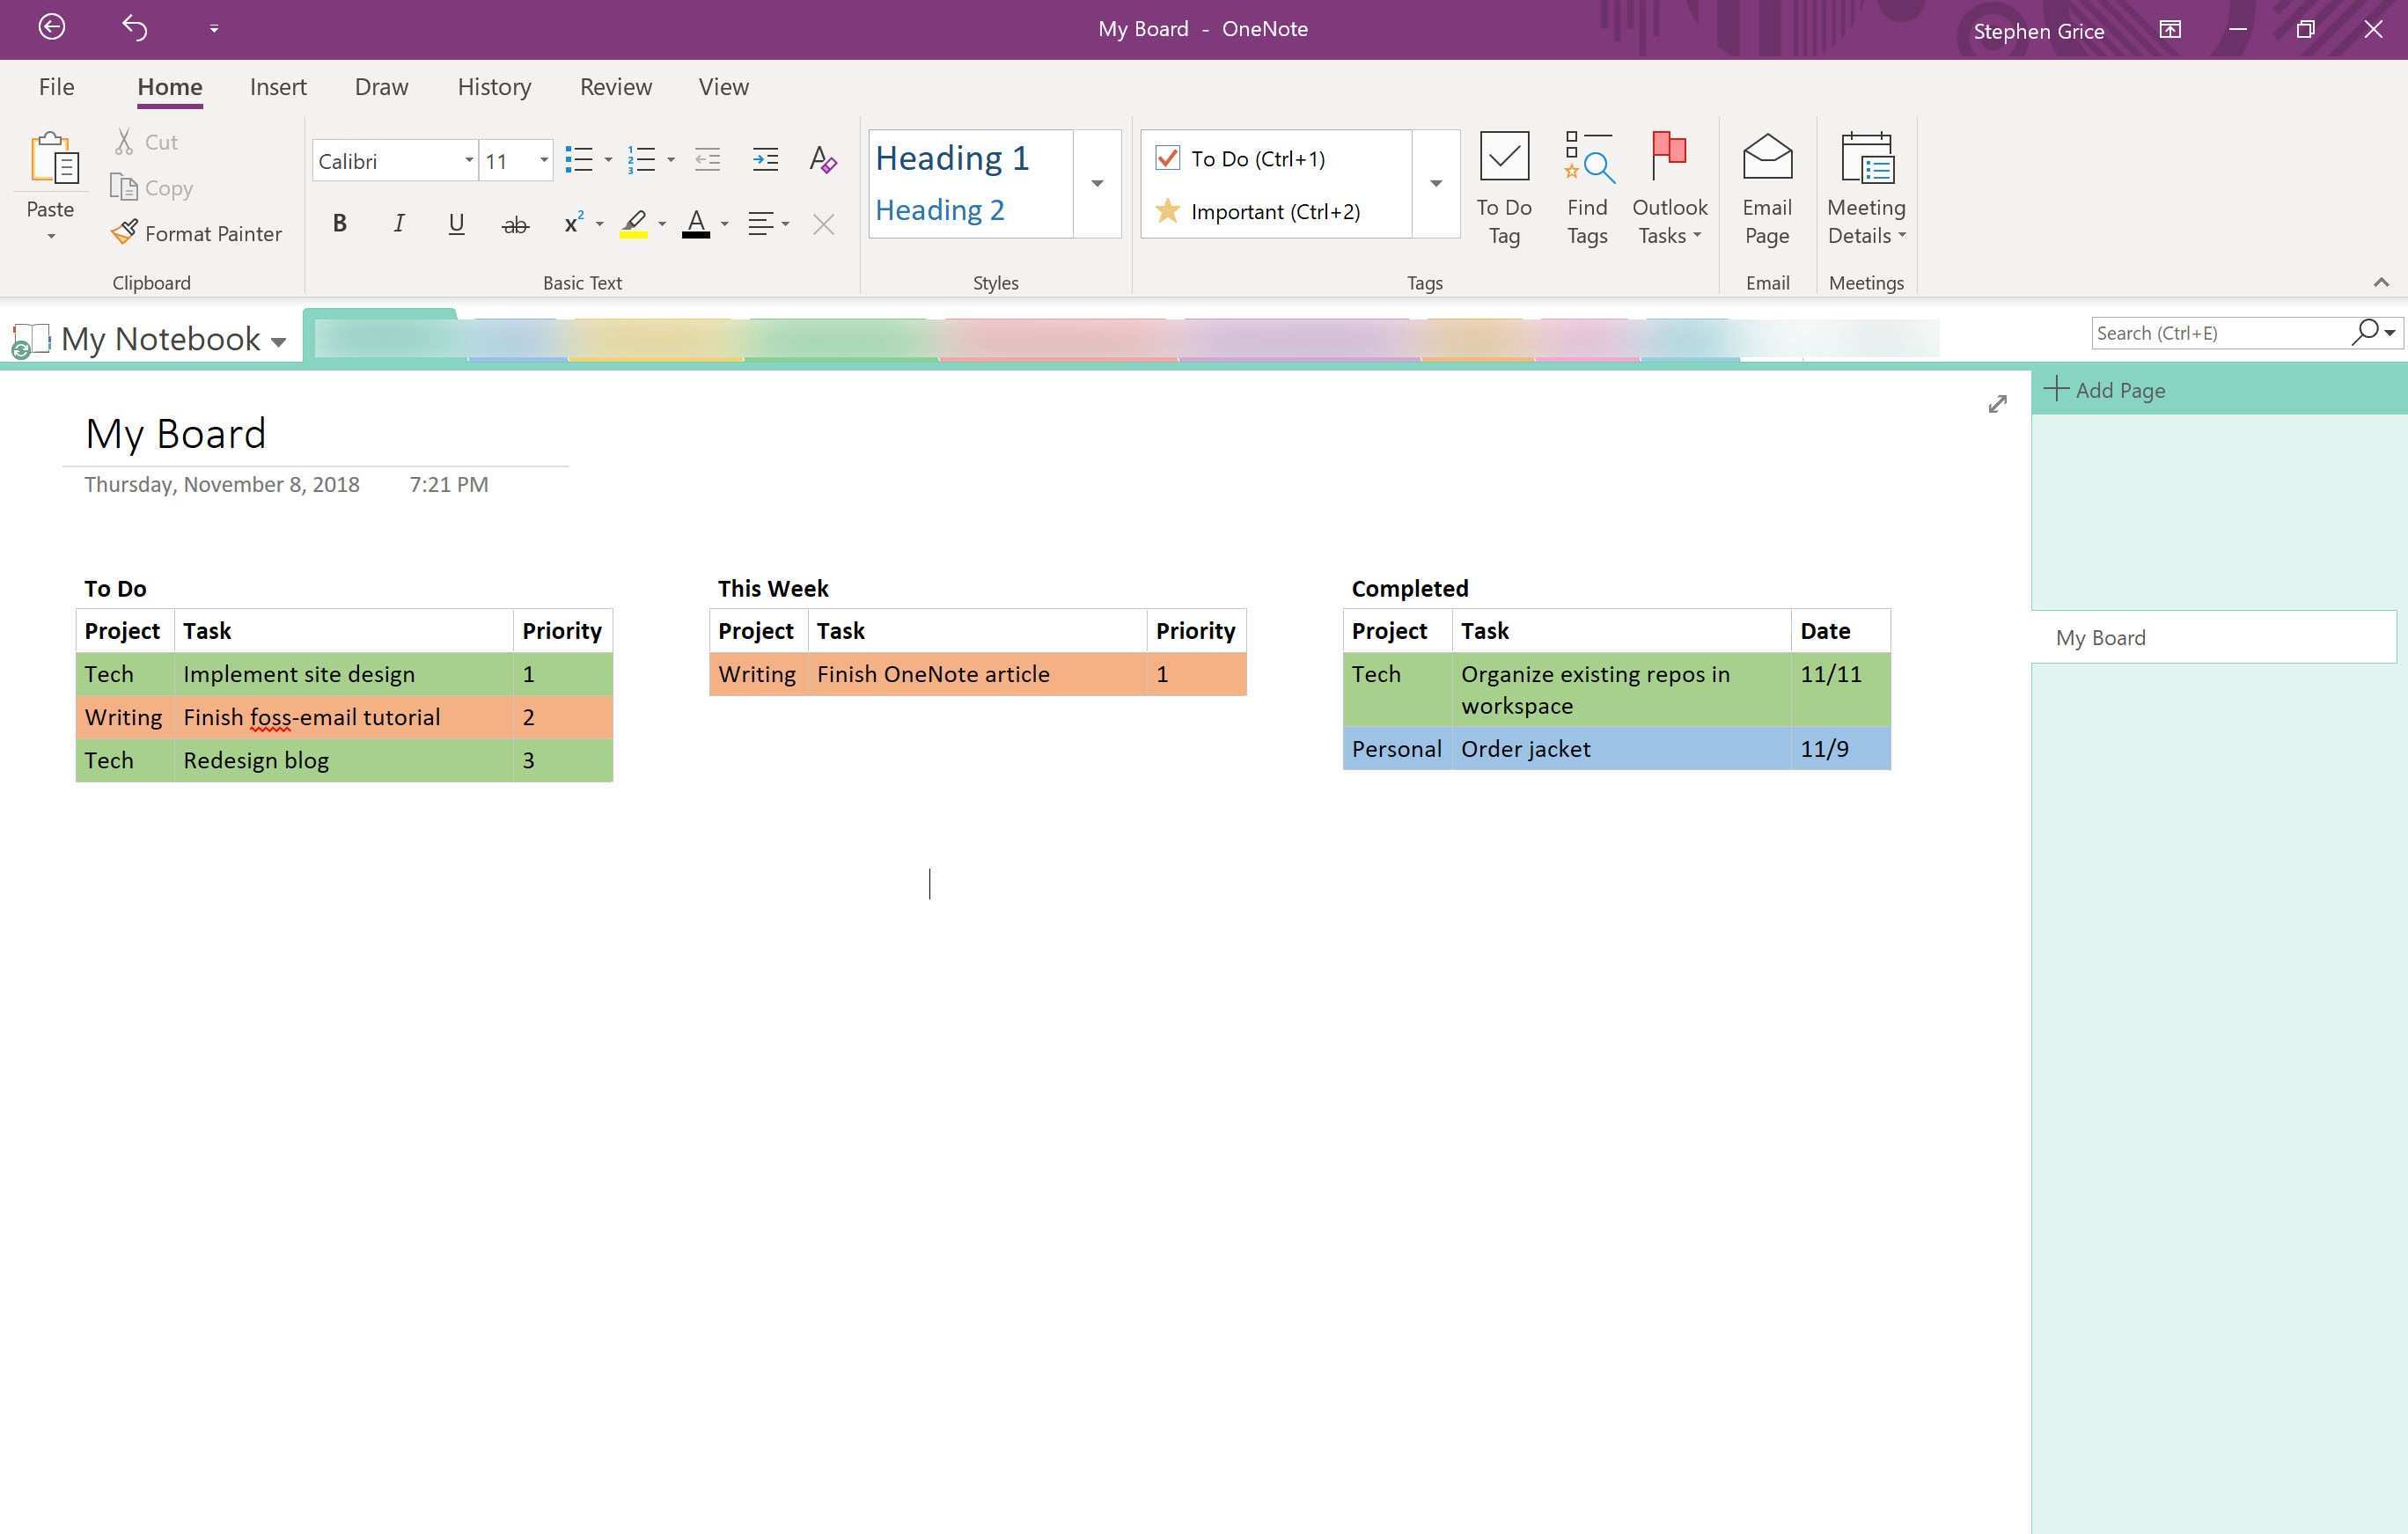 How To Create A Kanban Board In Onenote By Steve Grice Medium